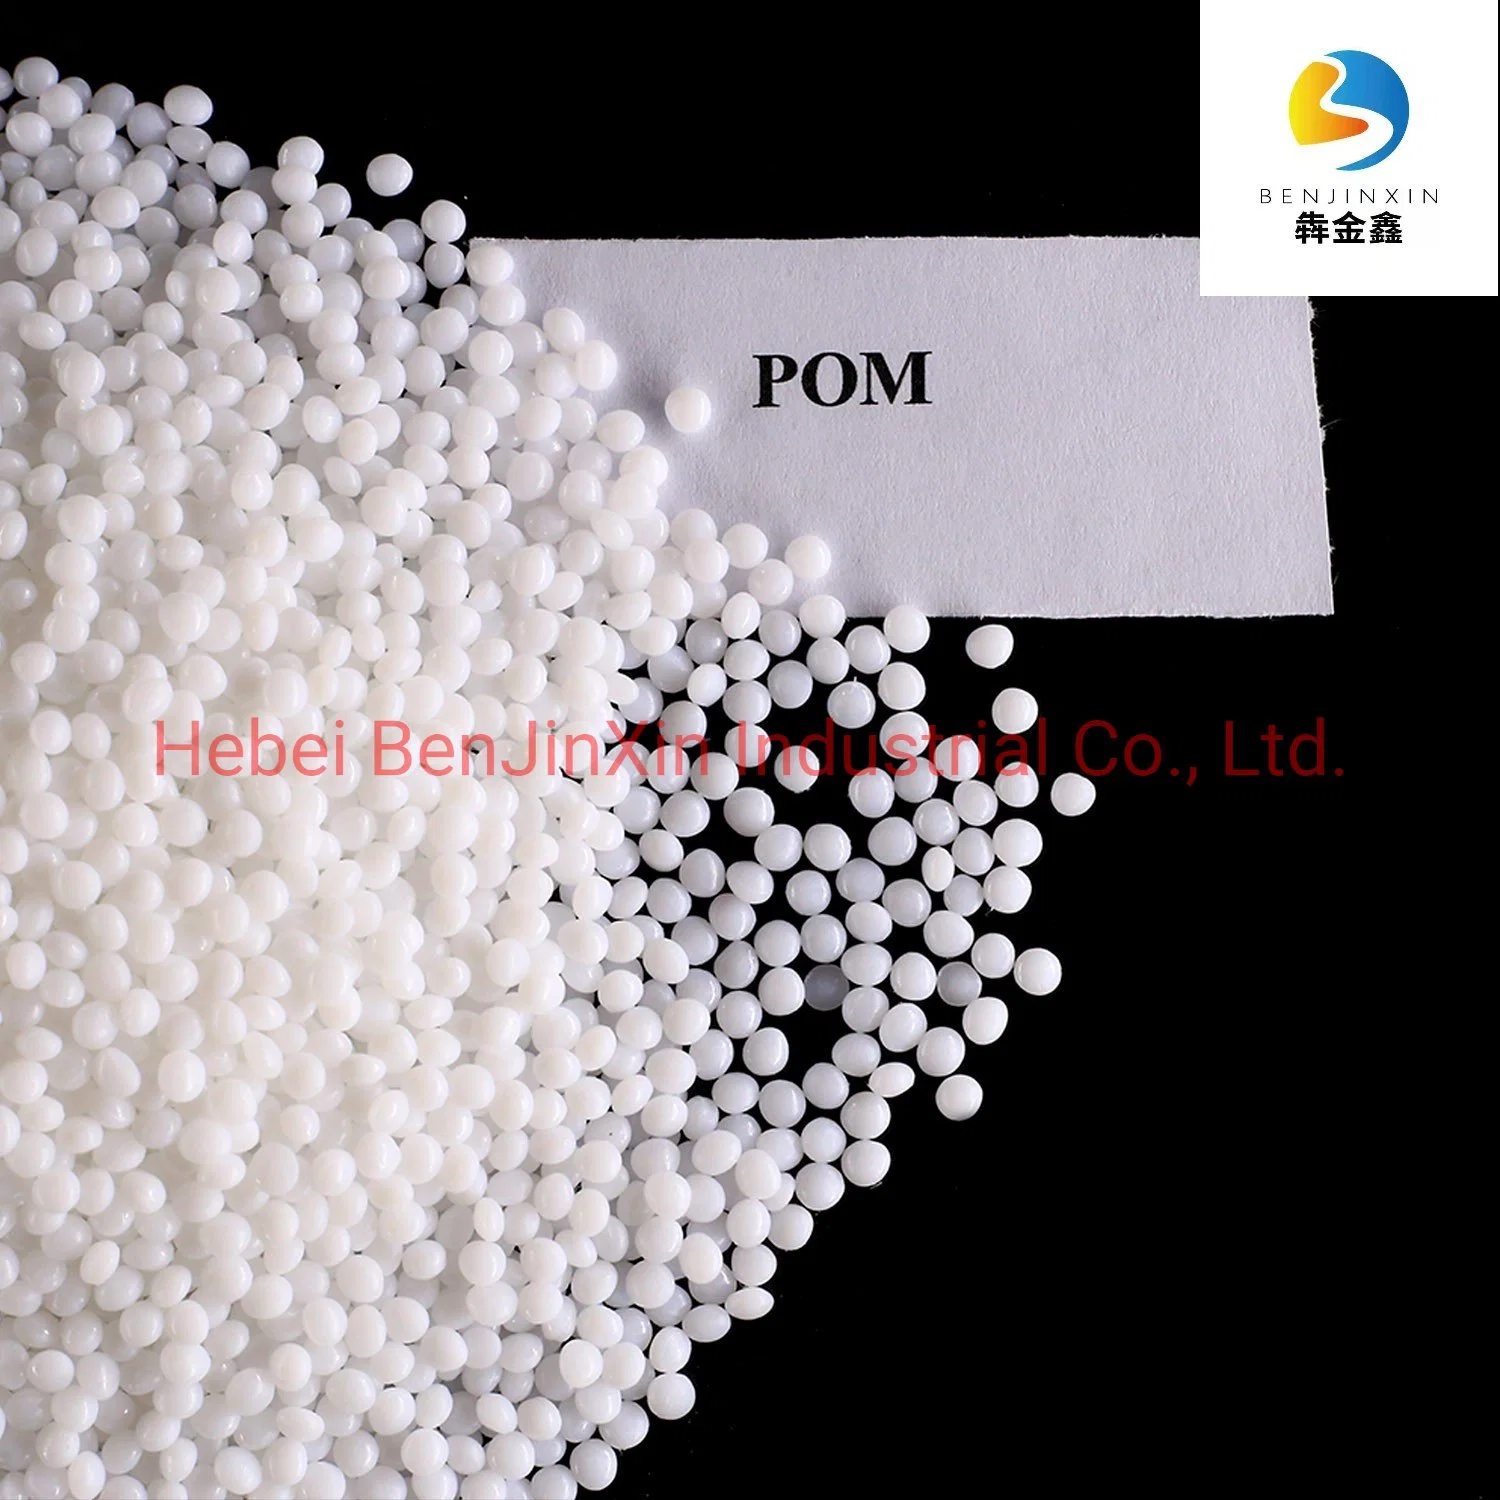 POM Granules POM Plastic White Item Color Form Material Raw Origin Type Shape Recycled Grade Injection Product Grain